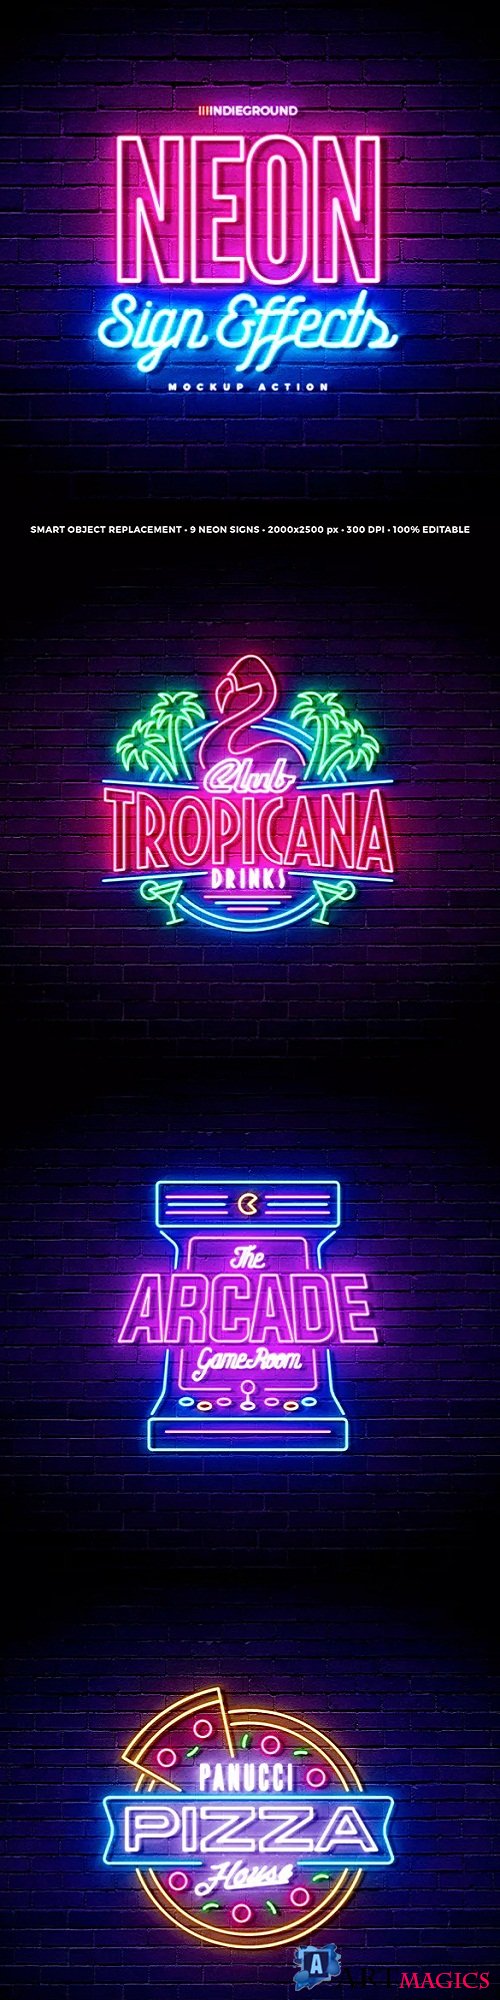 Neon Sign Effects 23320789